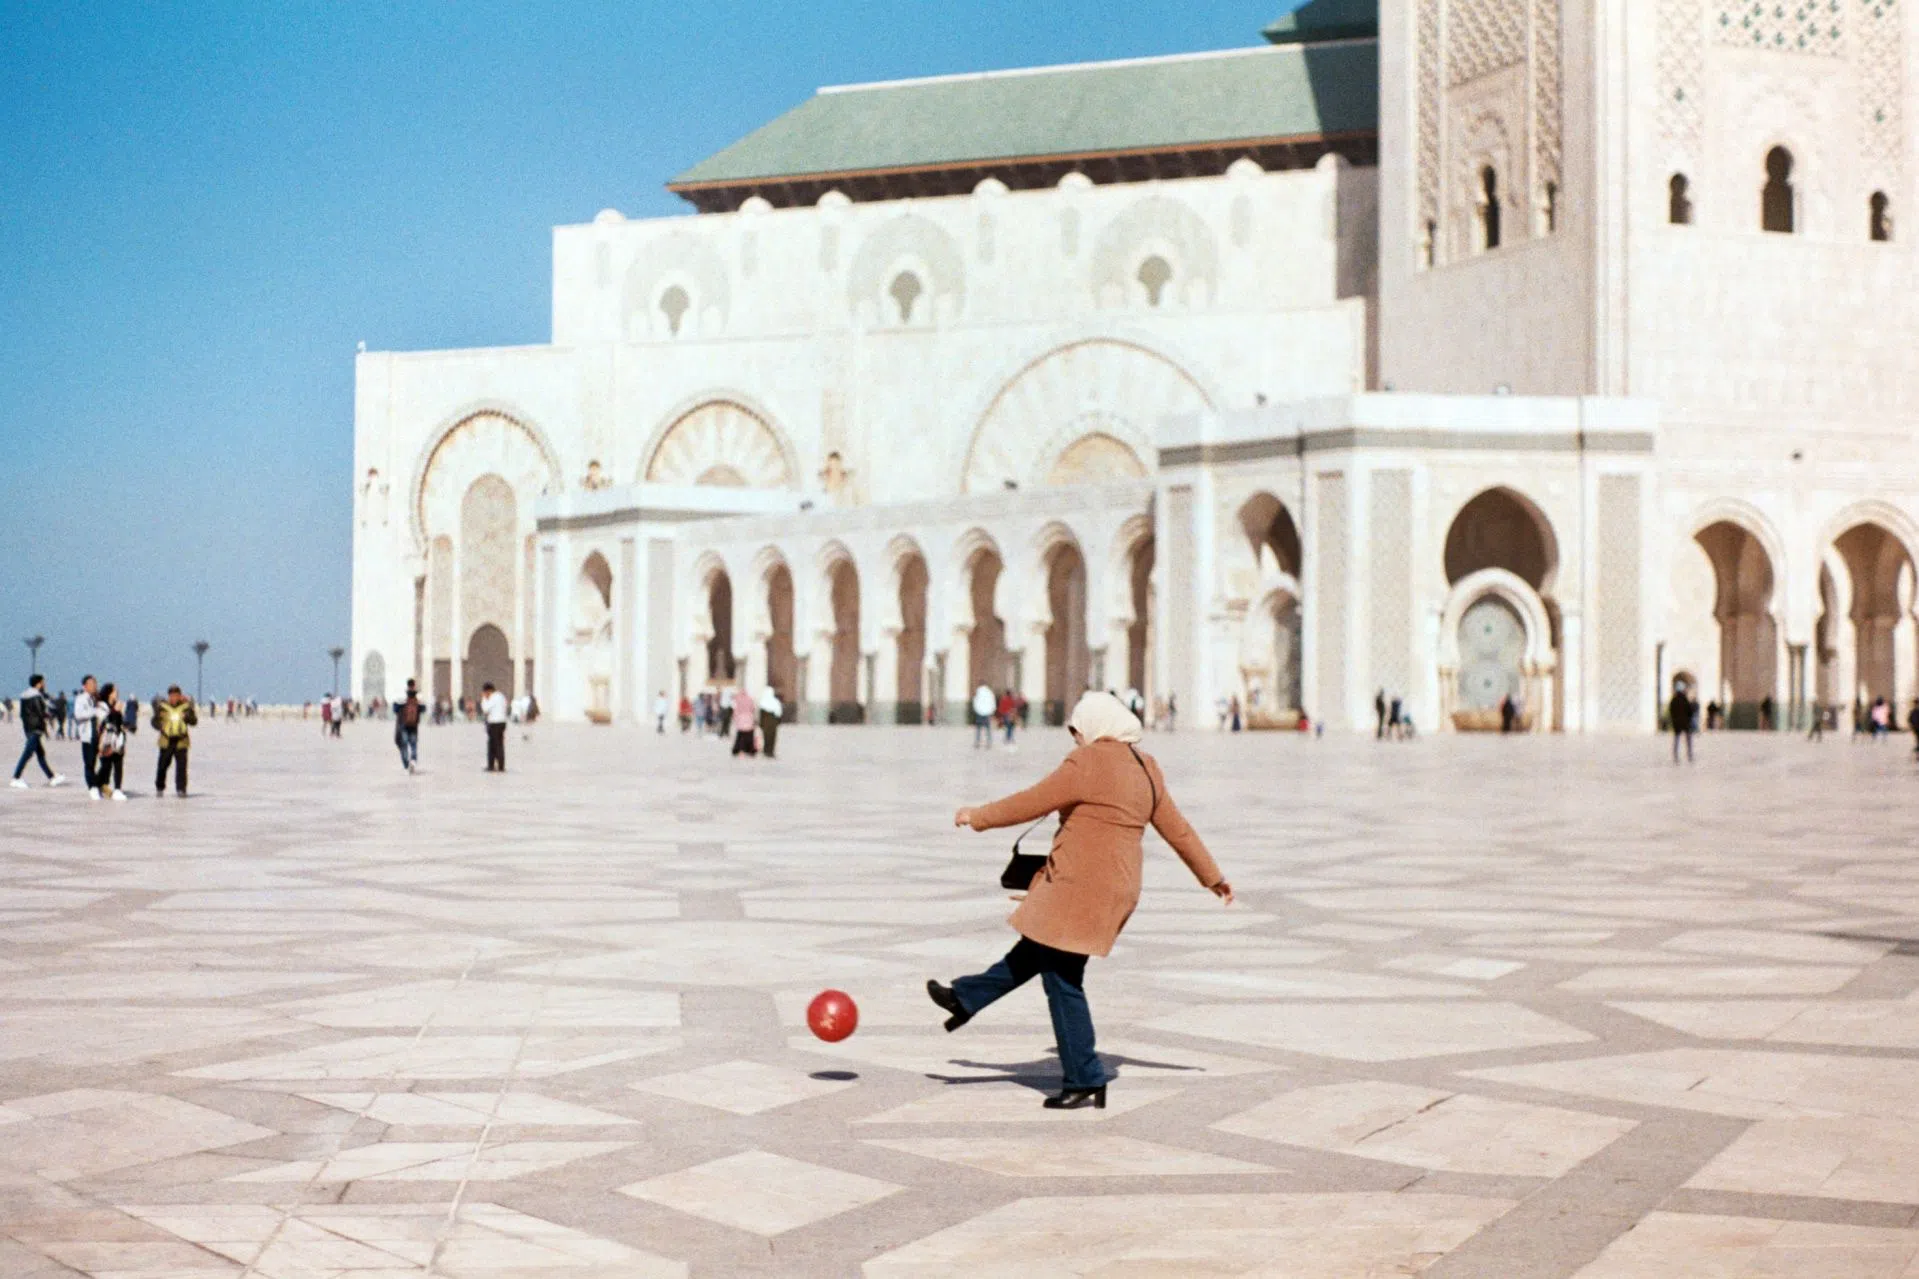 A mother plays soccer with her son outside the Hassan II Mosque.